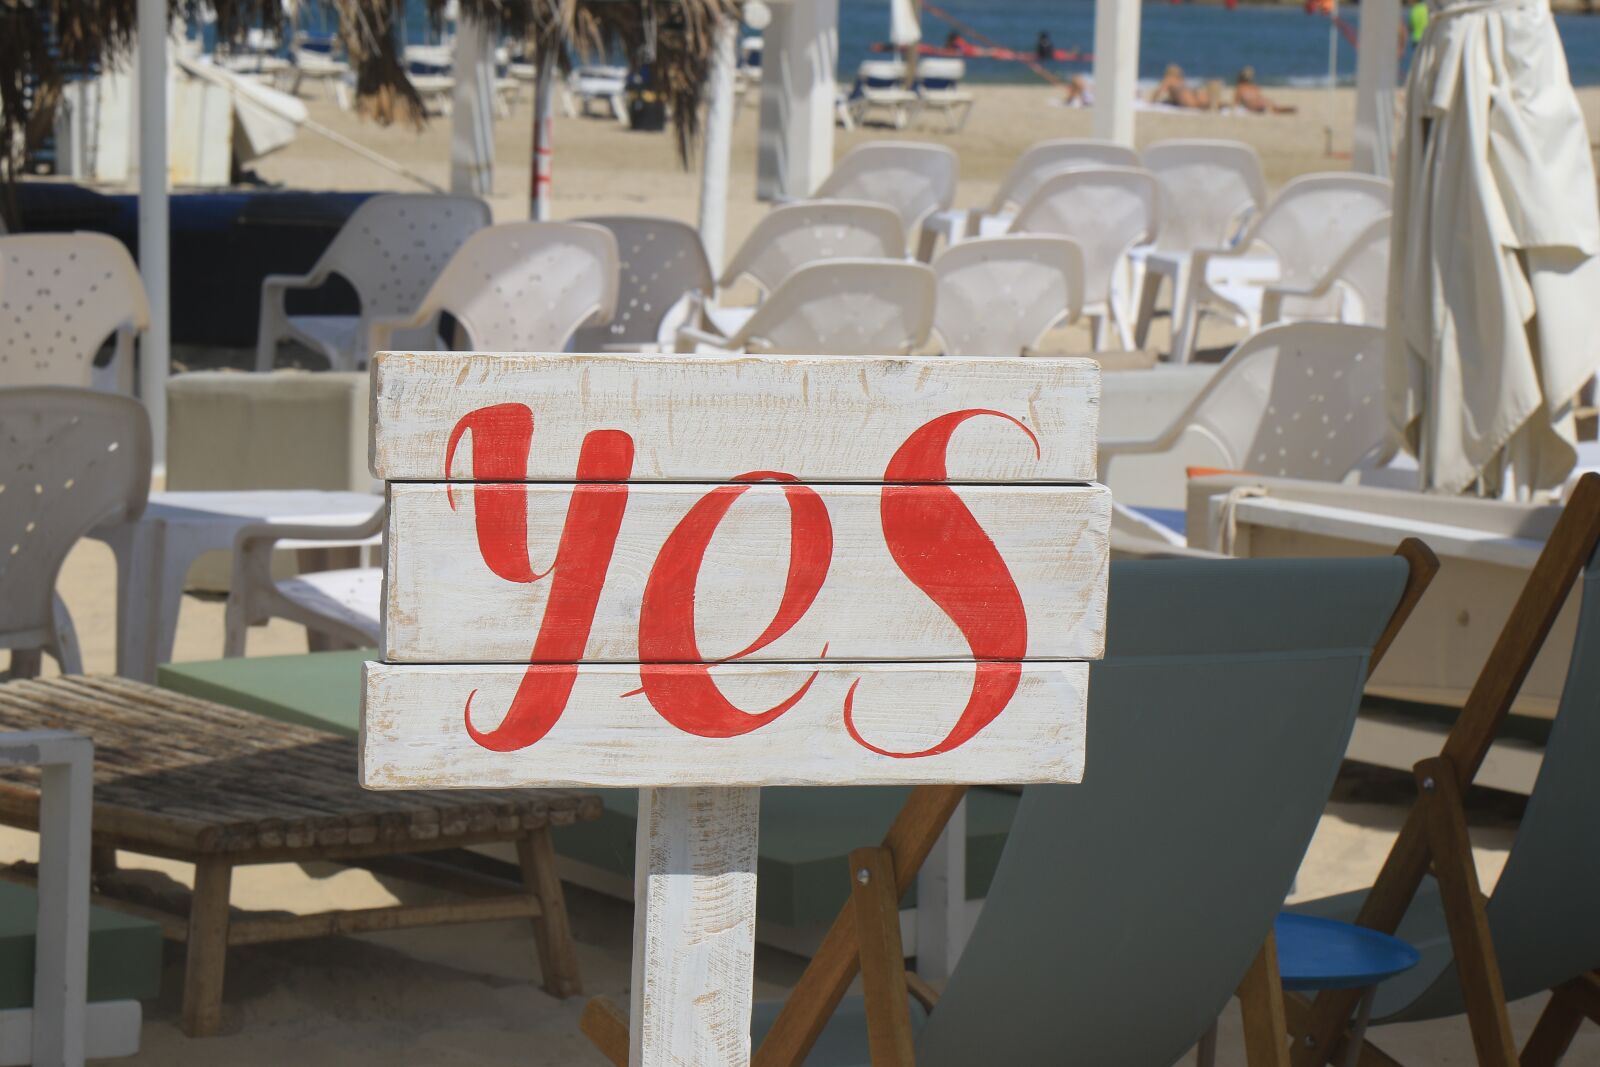 Tamron SP 70-200mm F2.8 Di VC USD G2 sample photo. Yes, sign, beach photography